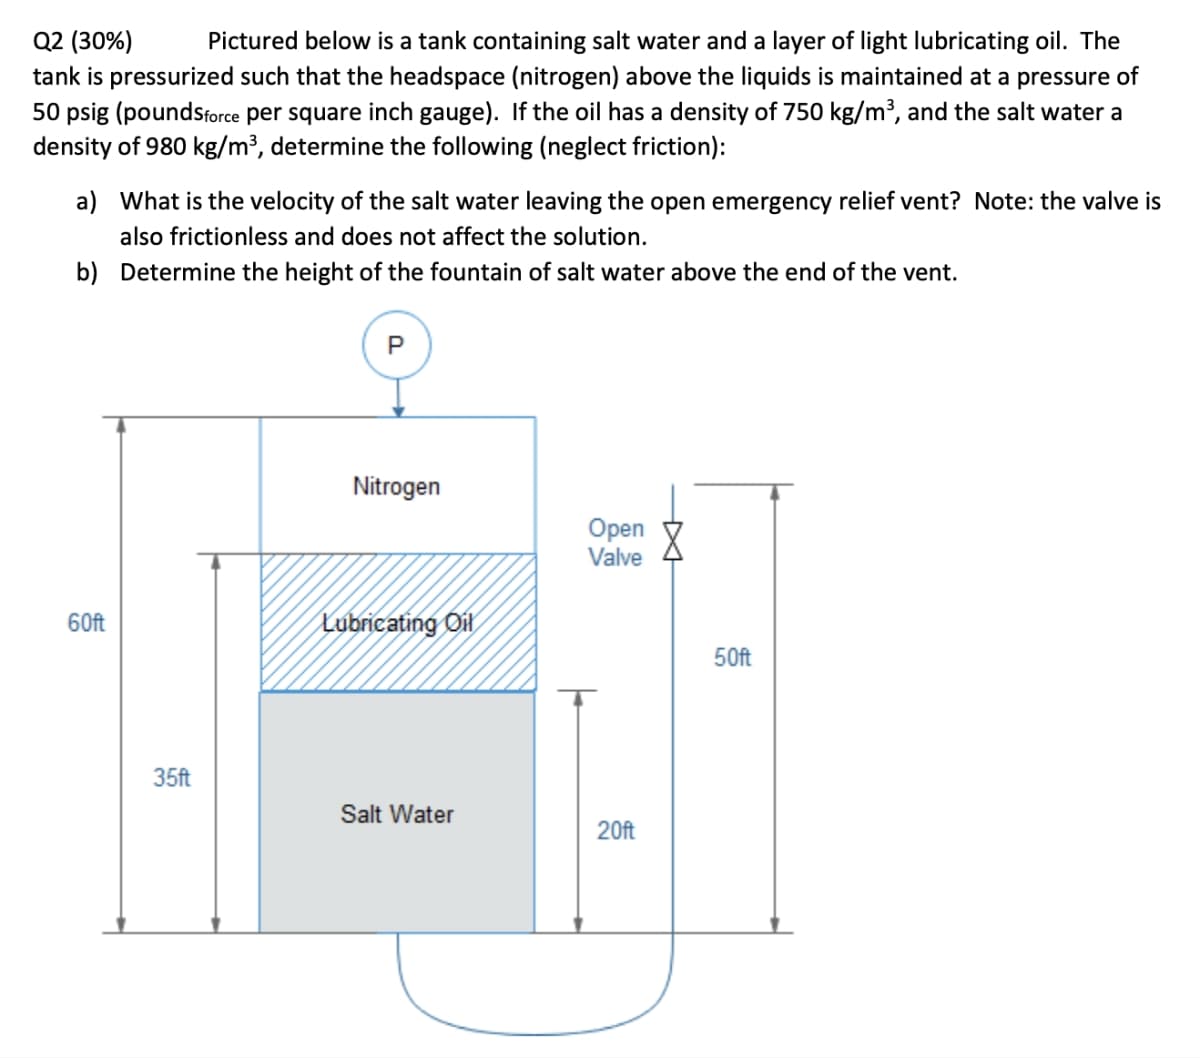 Q2 (30%) Pictured below is a tank containing salt water and a layer of light lubricating oil. The
tank is pressurized such that the headspace (nitrogen) above the liquids is maintained at a pressure of
50 psig (poundsforce per square inch gauge). If the oil has a density of 750 kg/m³, and the salt water a
density of 980 kg/m³, determine the following (neglect friction):
a) What is the velocity of the salt water leaving the open emergency relief vent? Note: the valve is
also frictionless and does not affect the solution.
b) Determine the height of the fountain of salt water above the end of the vent.
60ft
35ft
Nitrogen
Lubricating Oil
Salt Water
Open
Valve
20ft
50ft